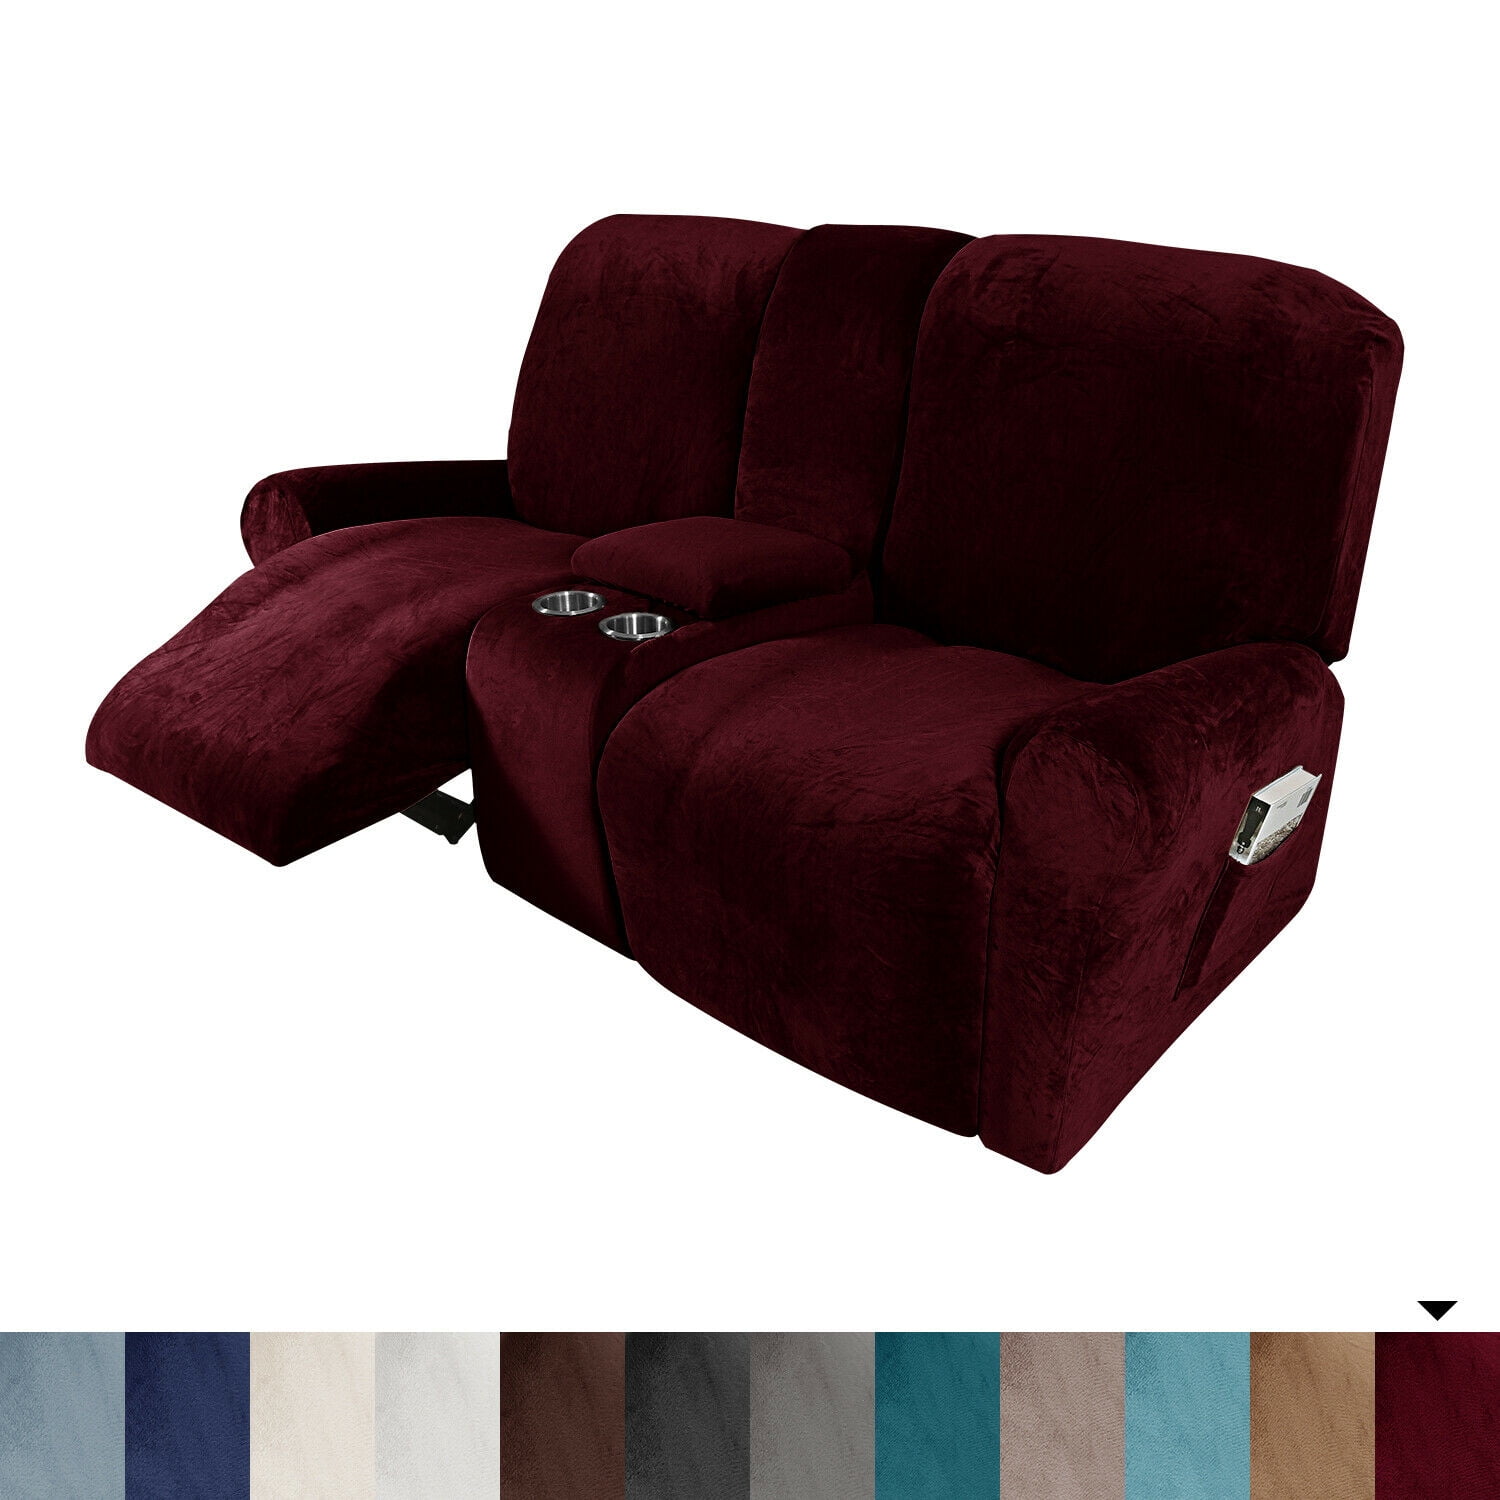 Classic Accessories Cover Bonanza Red/Brown Matelasse Recliner Slipcover  23-in W x 35-in H x 21-in D in the Slipcovers department at